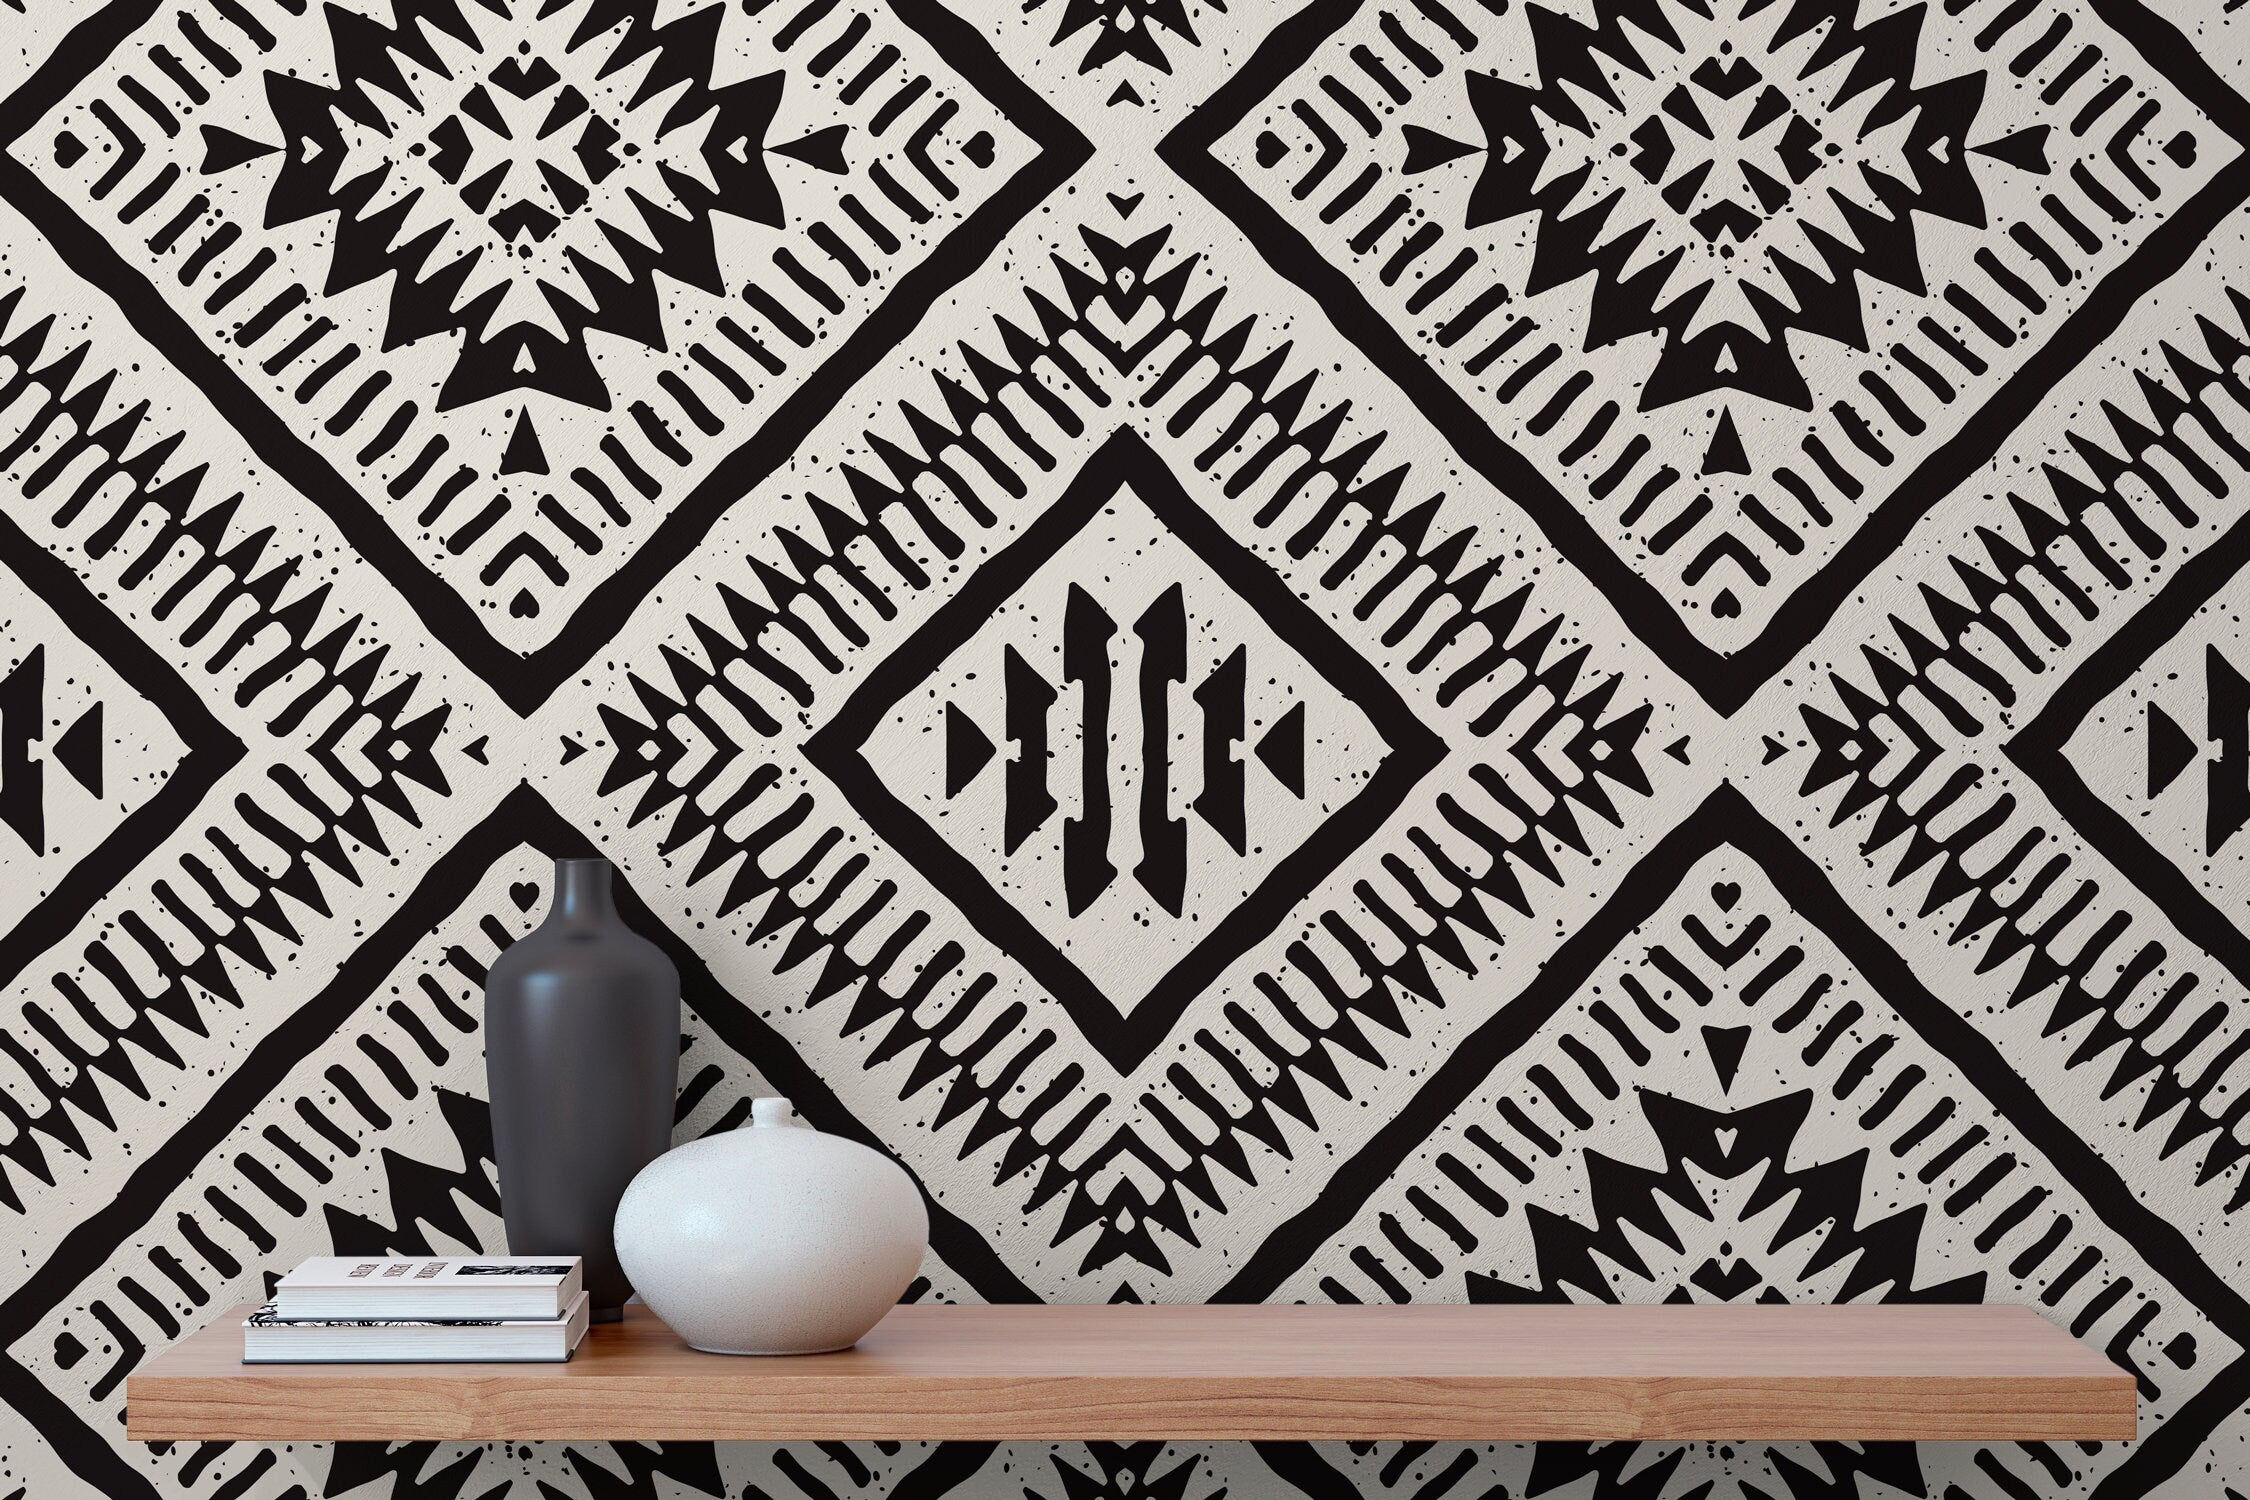 Bohemian tribal print wallpaper for baby room interior by Livettes